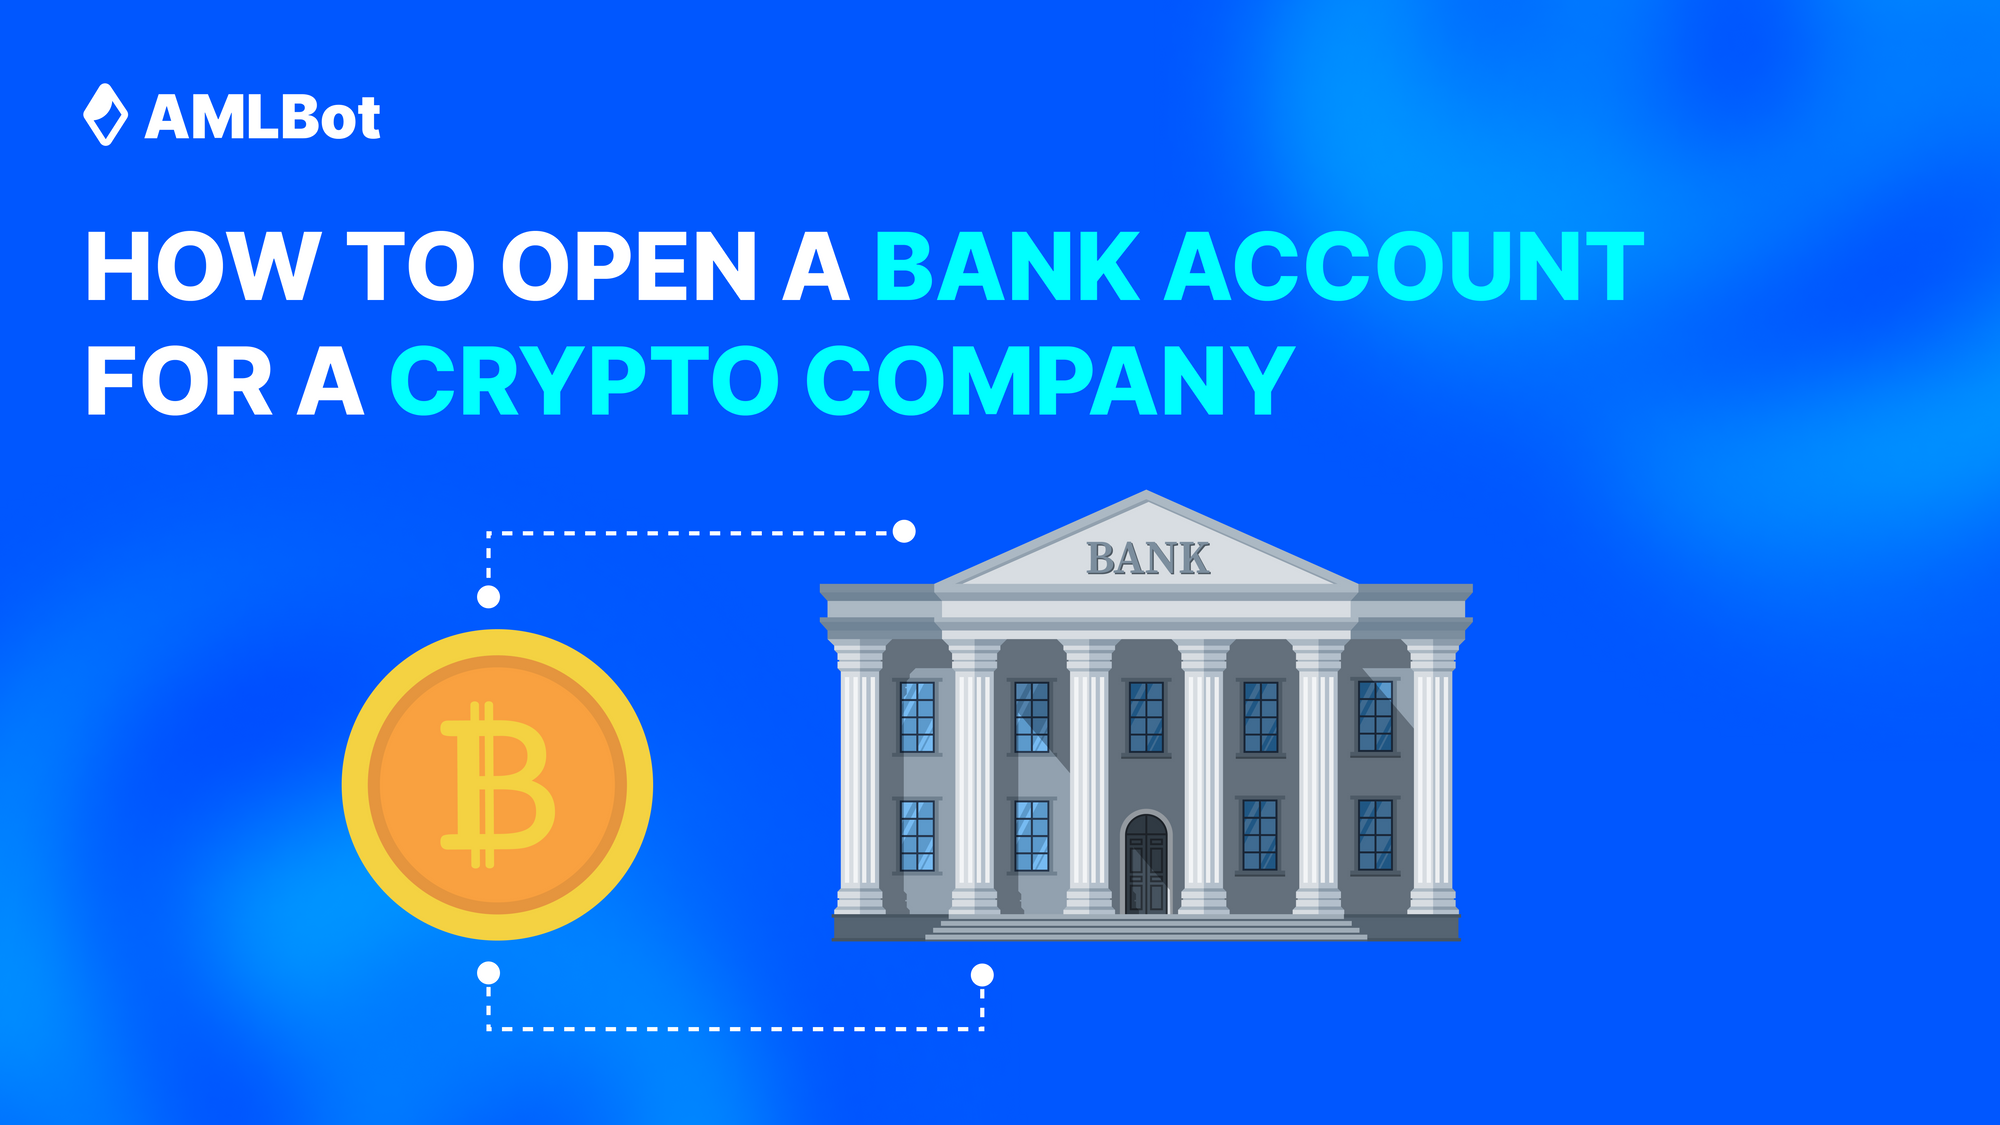 How to Open a Bank Account for a Crypto Company